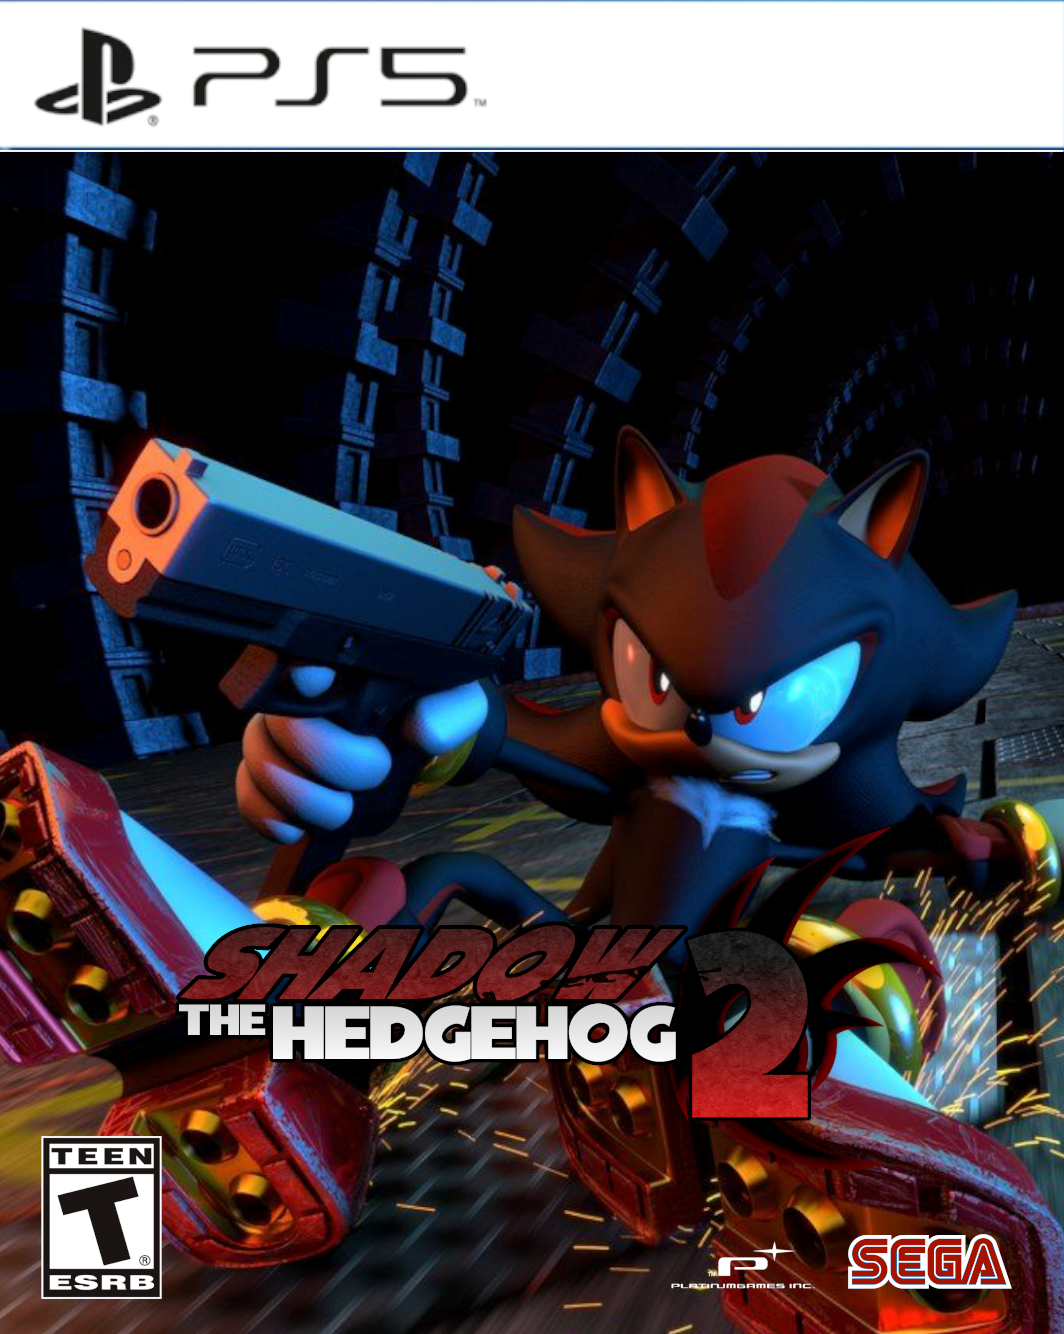 Is Shadow in Sonic the Hedgehog 2?